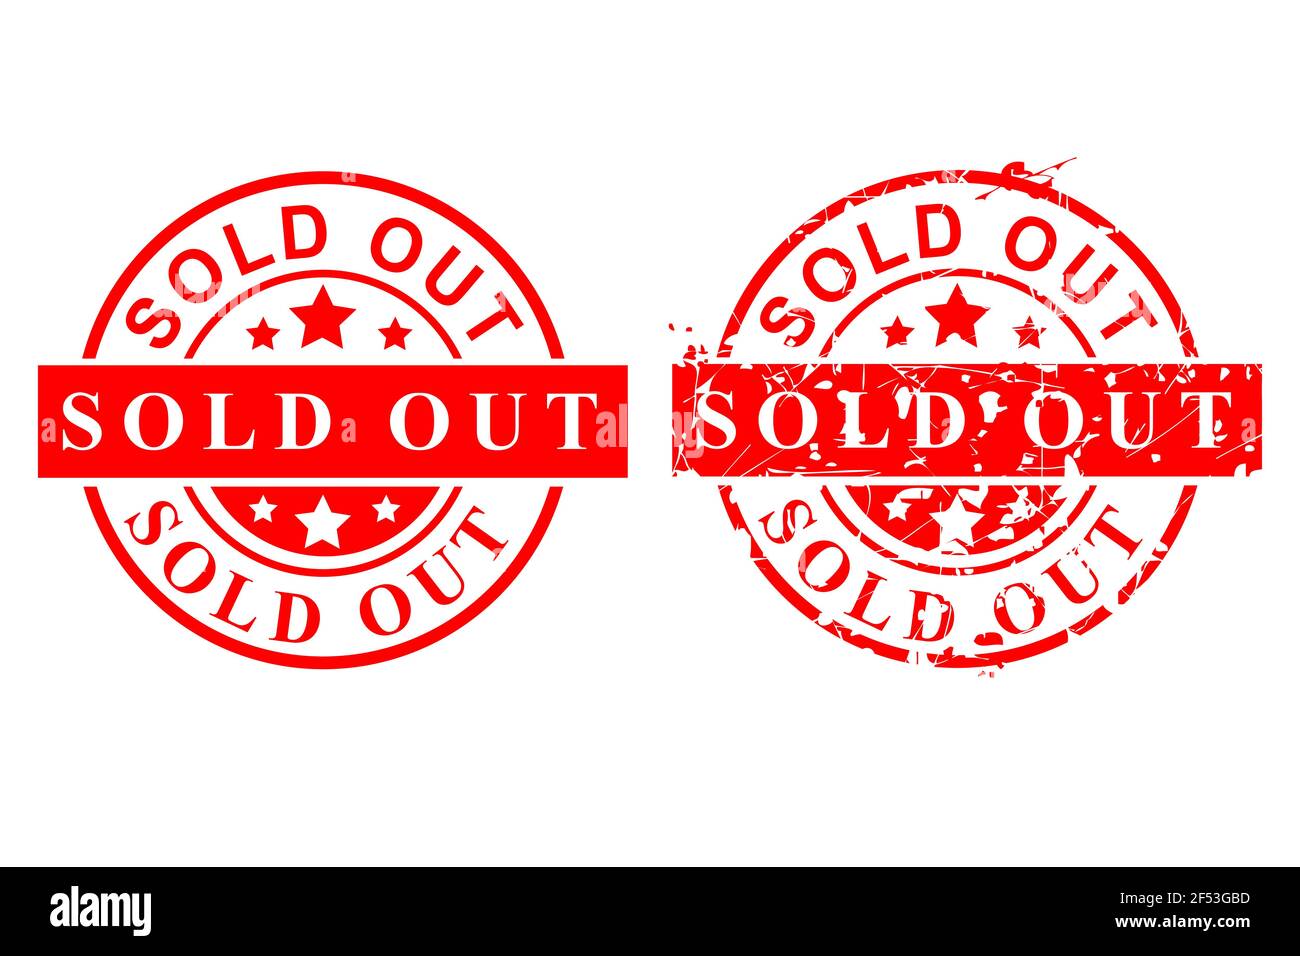 Vector Red Circle Rusty Vector Rubber Stamp, Sold Out, Isolated on White Stock Vector